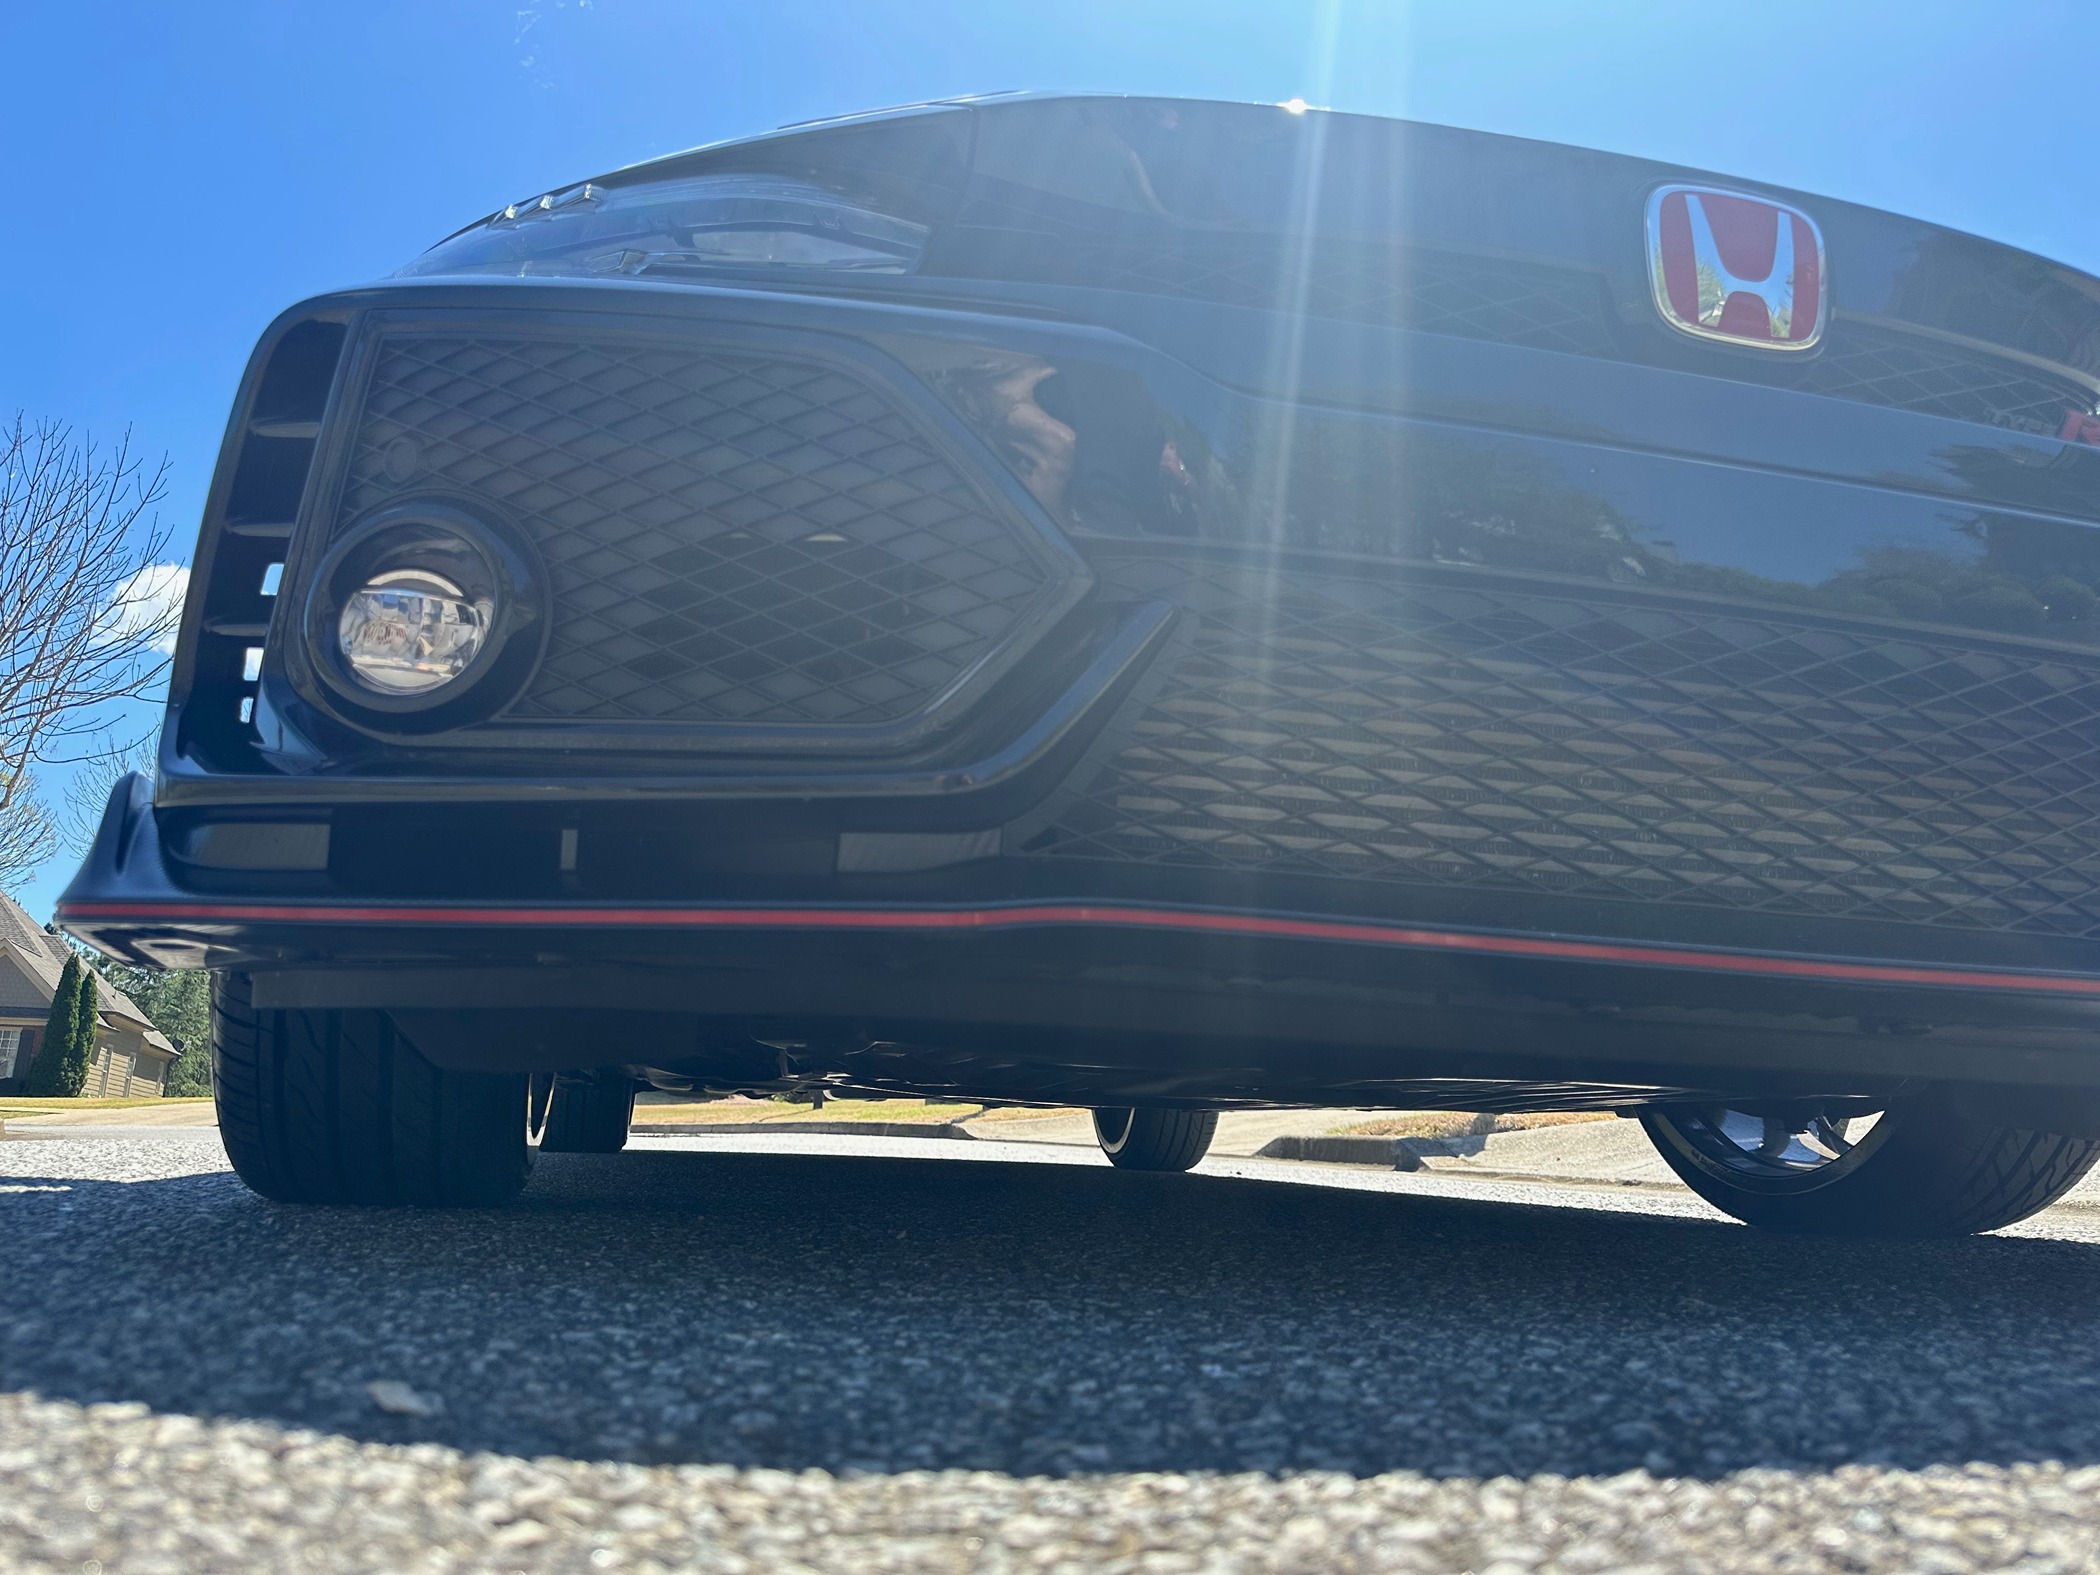 Honda Civic 10th gen Sold. 2019 Civic Type R for sale IMG_8151